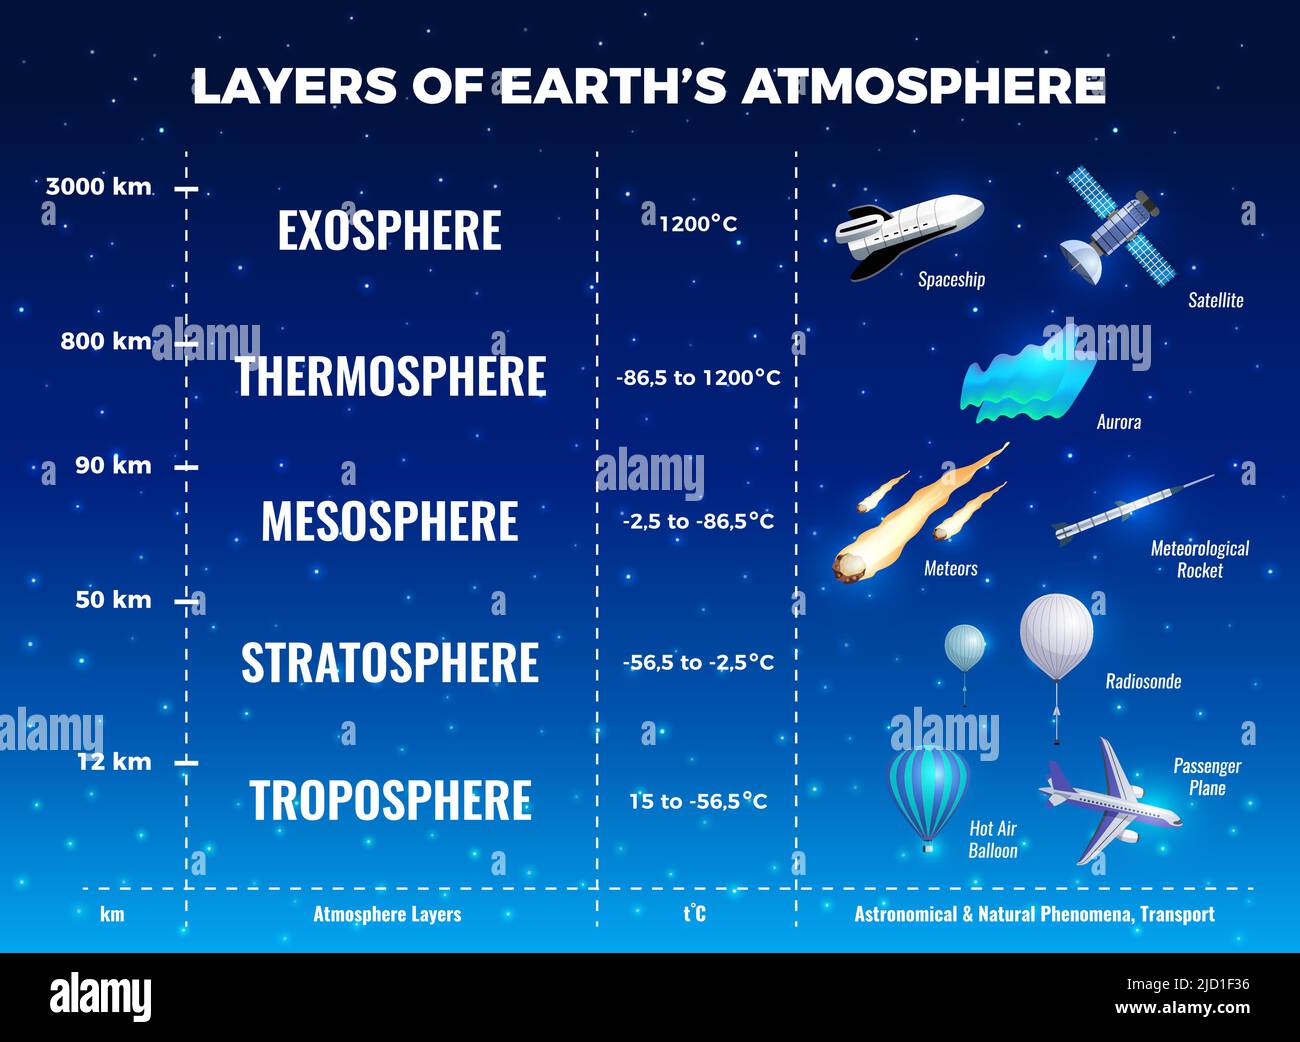 mesosphere layer of the atmosphere